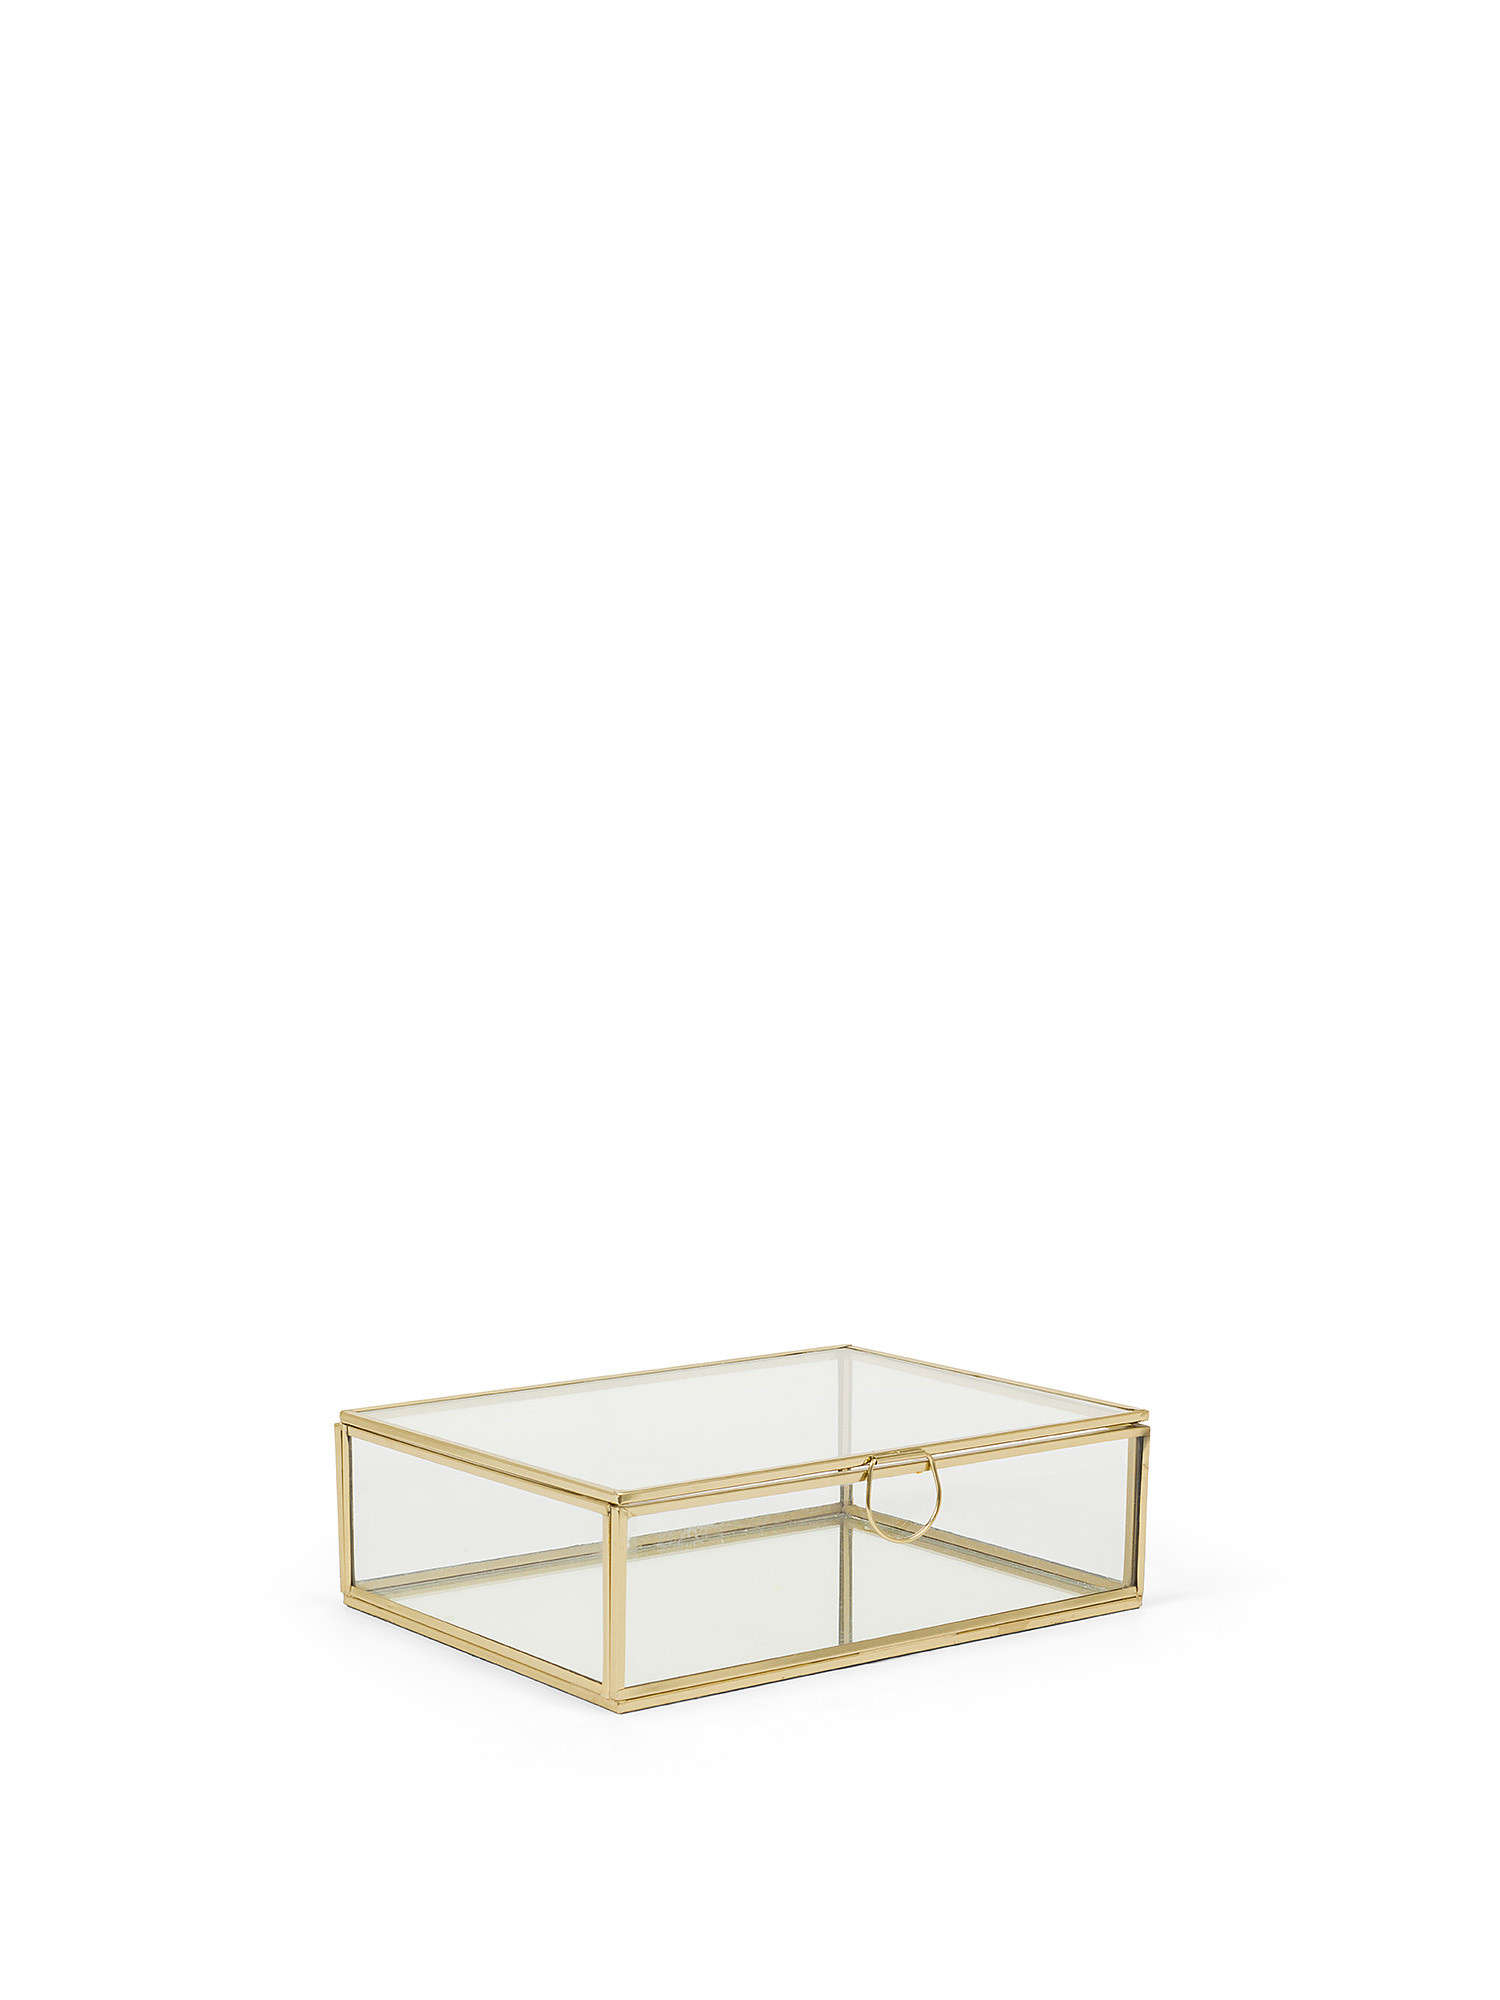 Glass jewelery box with golden edges, Transparent, large image number 0